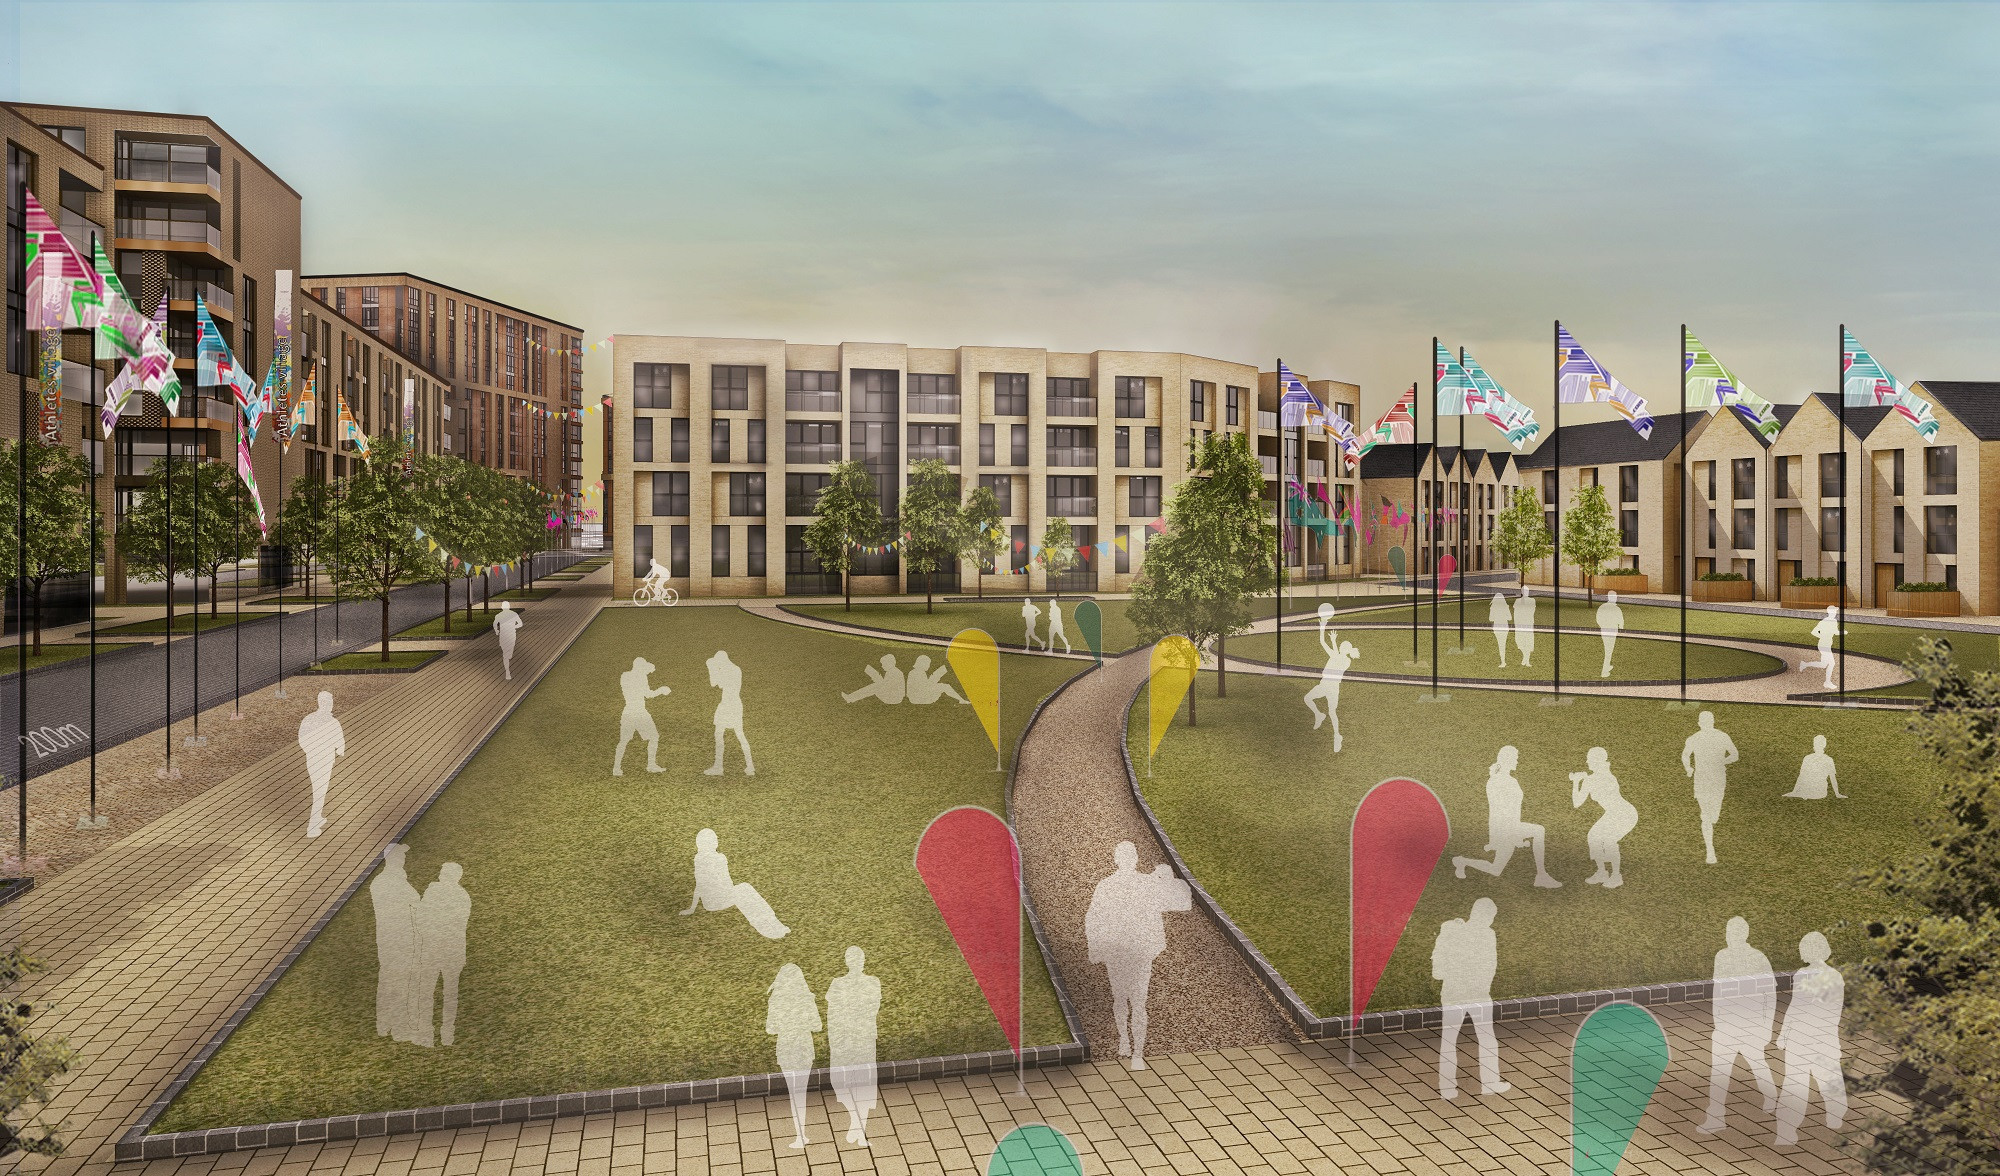 Birmingham 2022 intend to transform the Games Village into affordable housing after the event ©Birmingham 2022